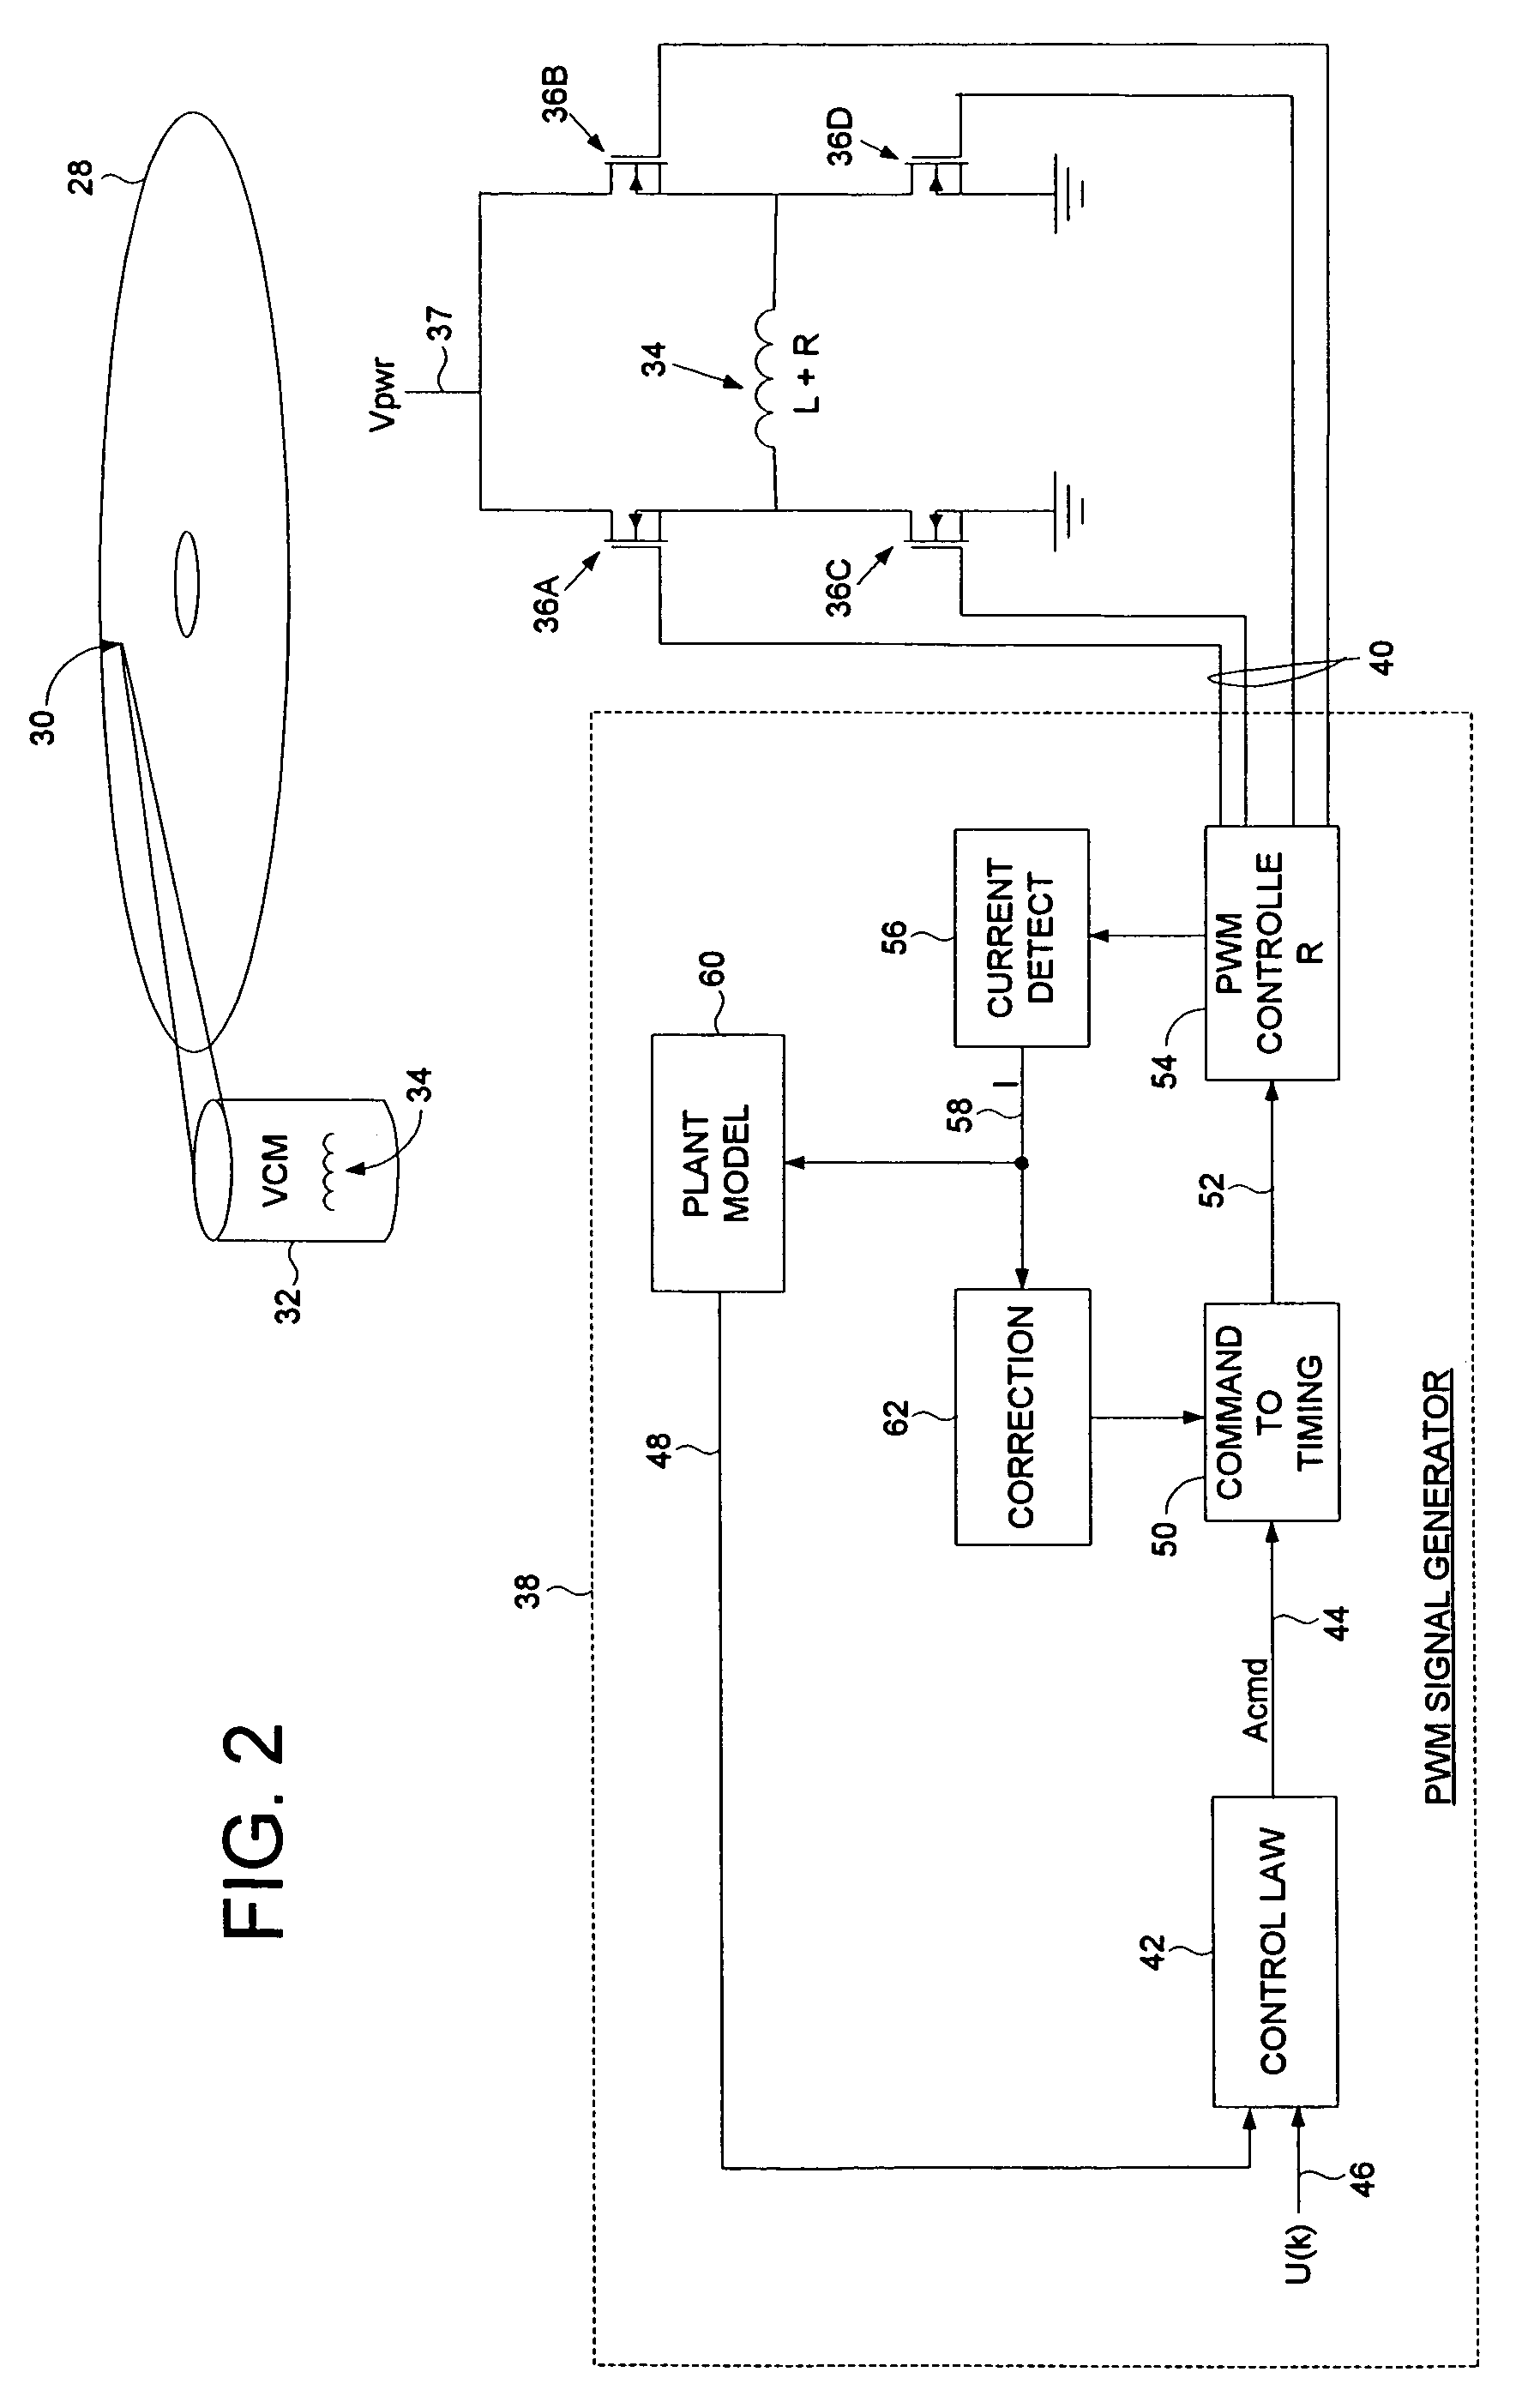 Disk drive pulse width modulating a voice coil motor using model reference current feedback